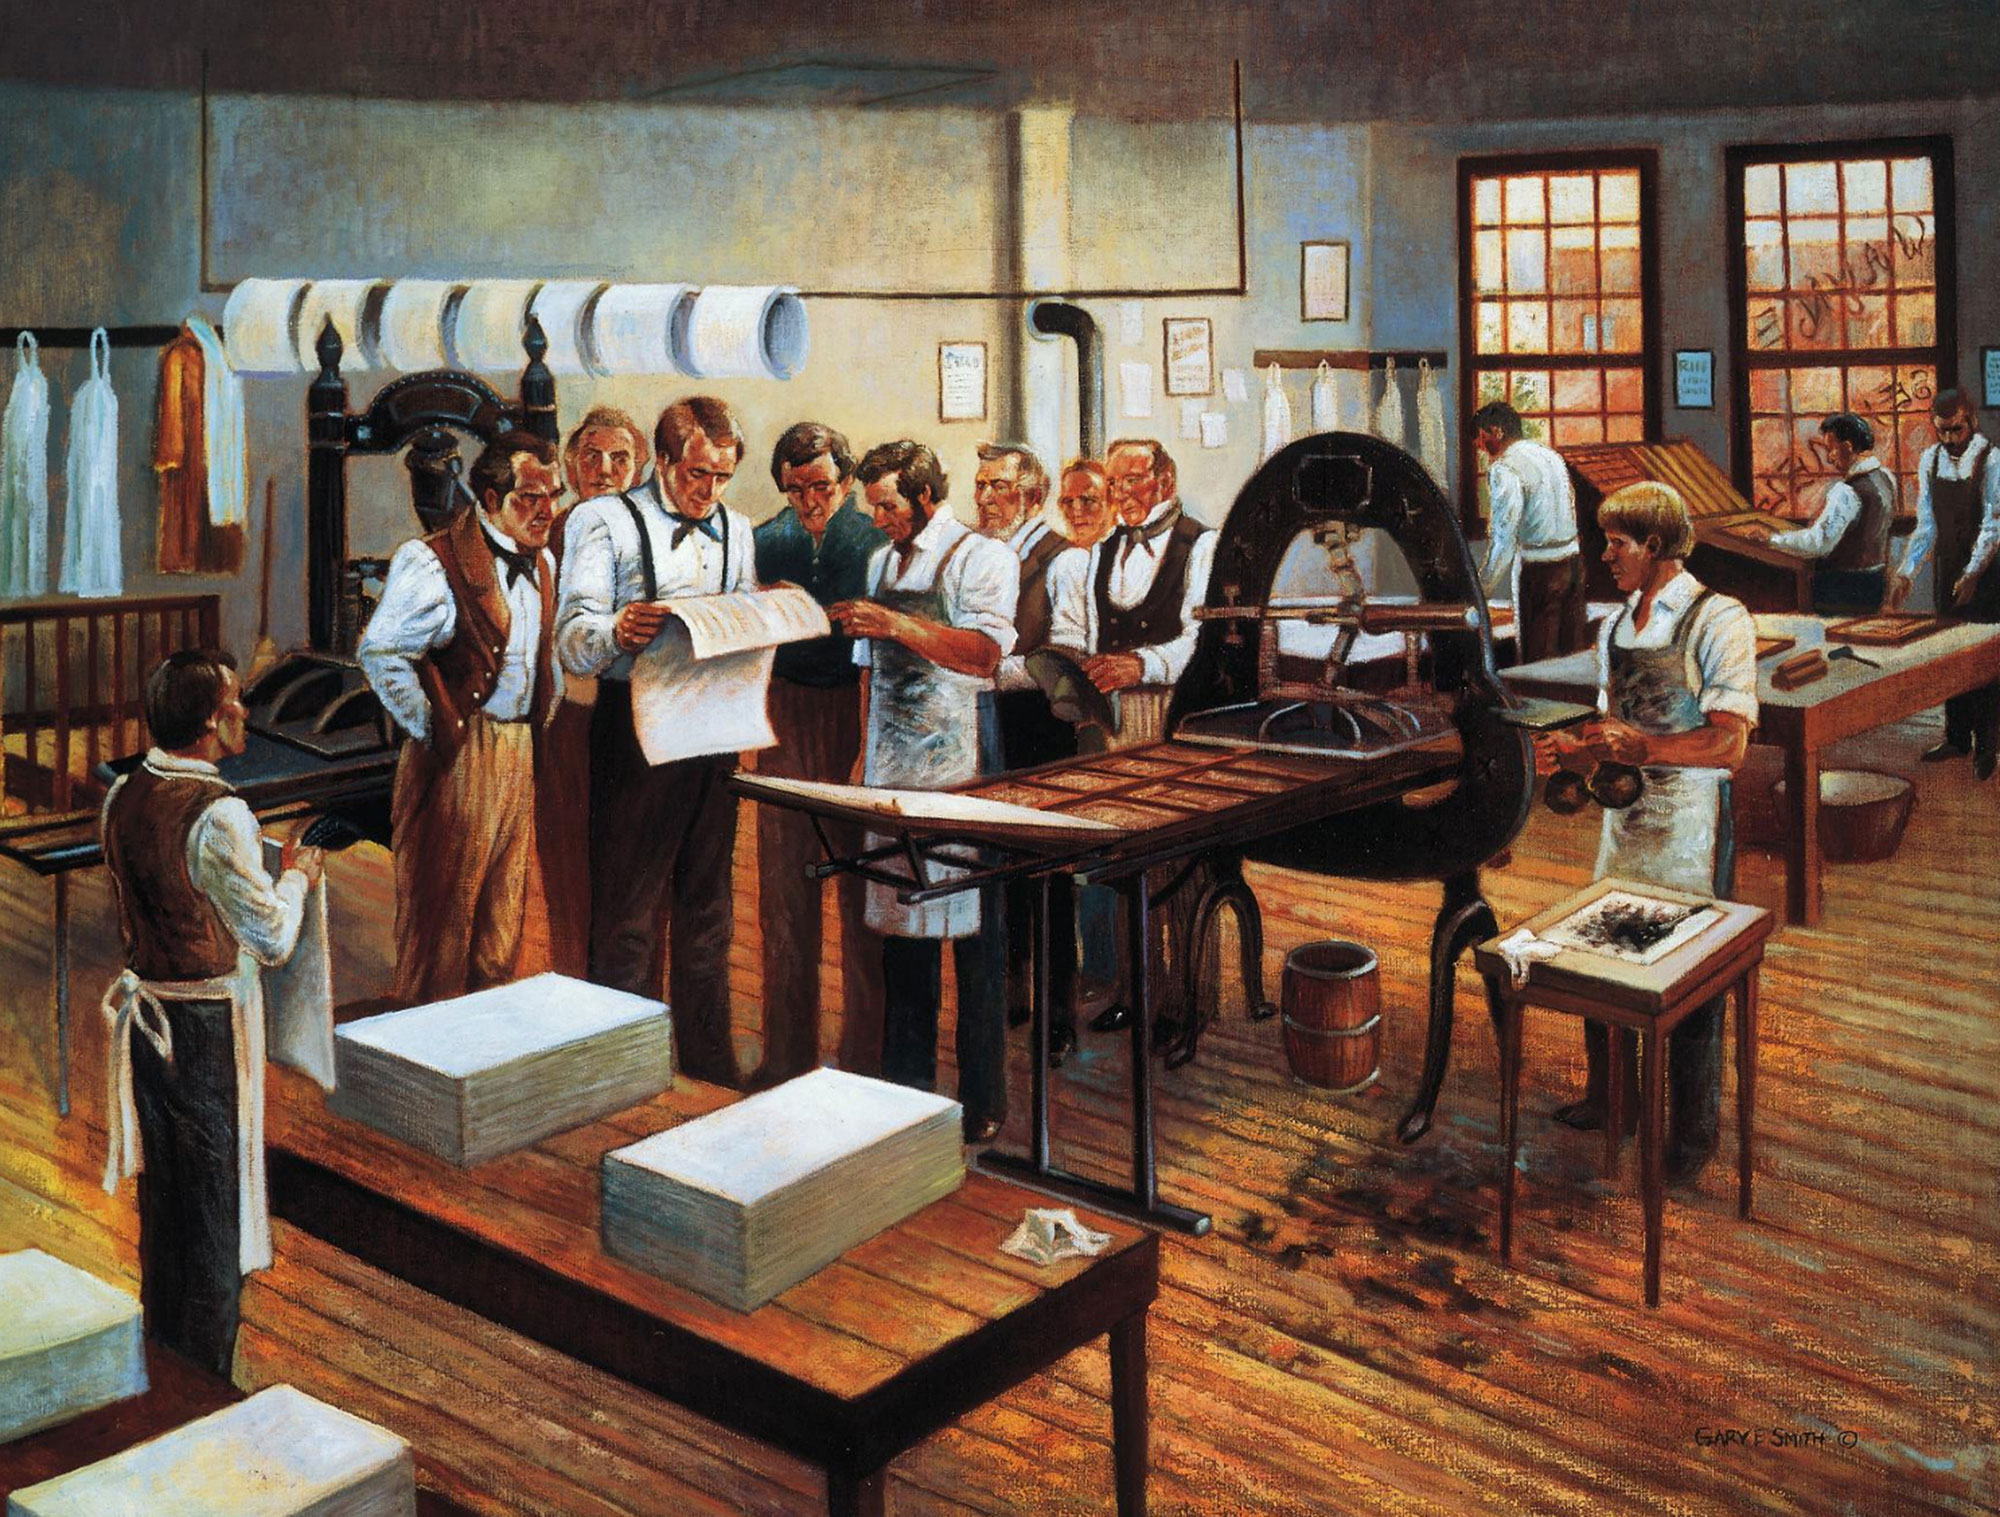 A painting. A group of 8 men stand in a printing office near a printing press. Joseph Smith, Jr. in the middle, holds a sheet of printed paper. Several other men in the printing office walk around working.